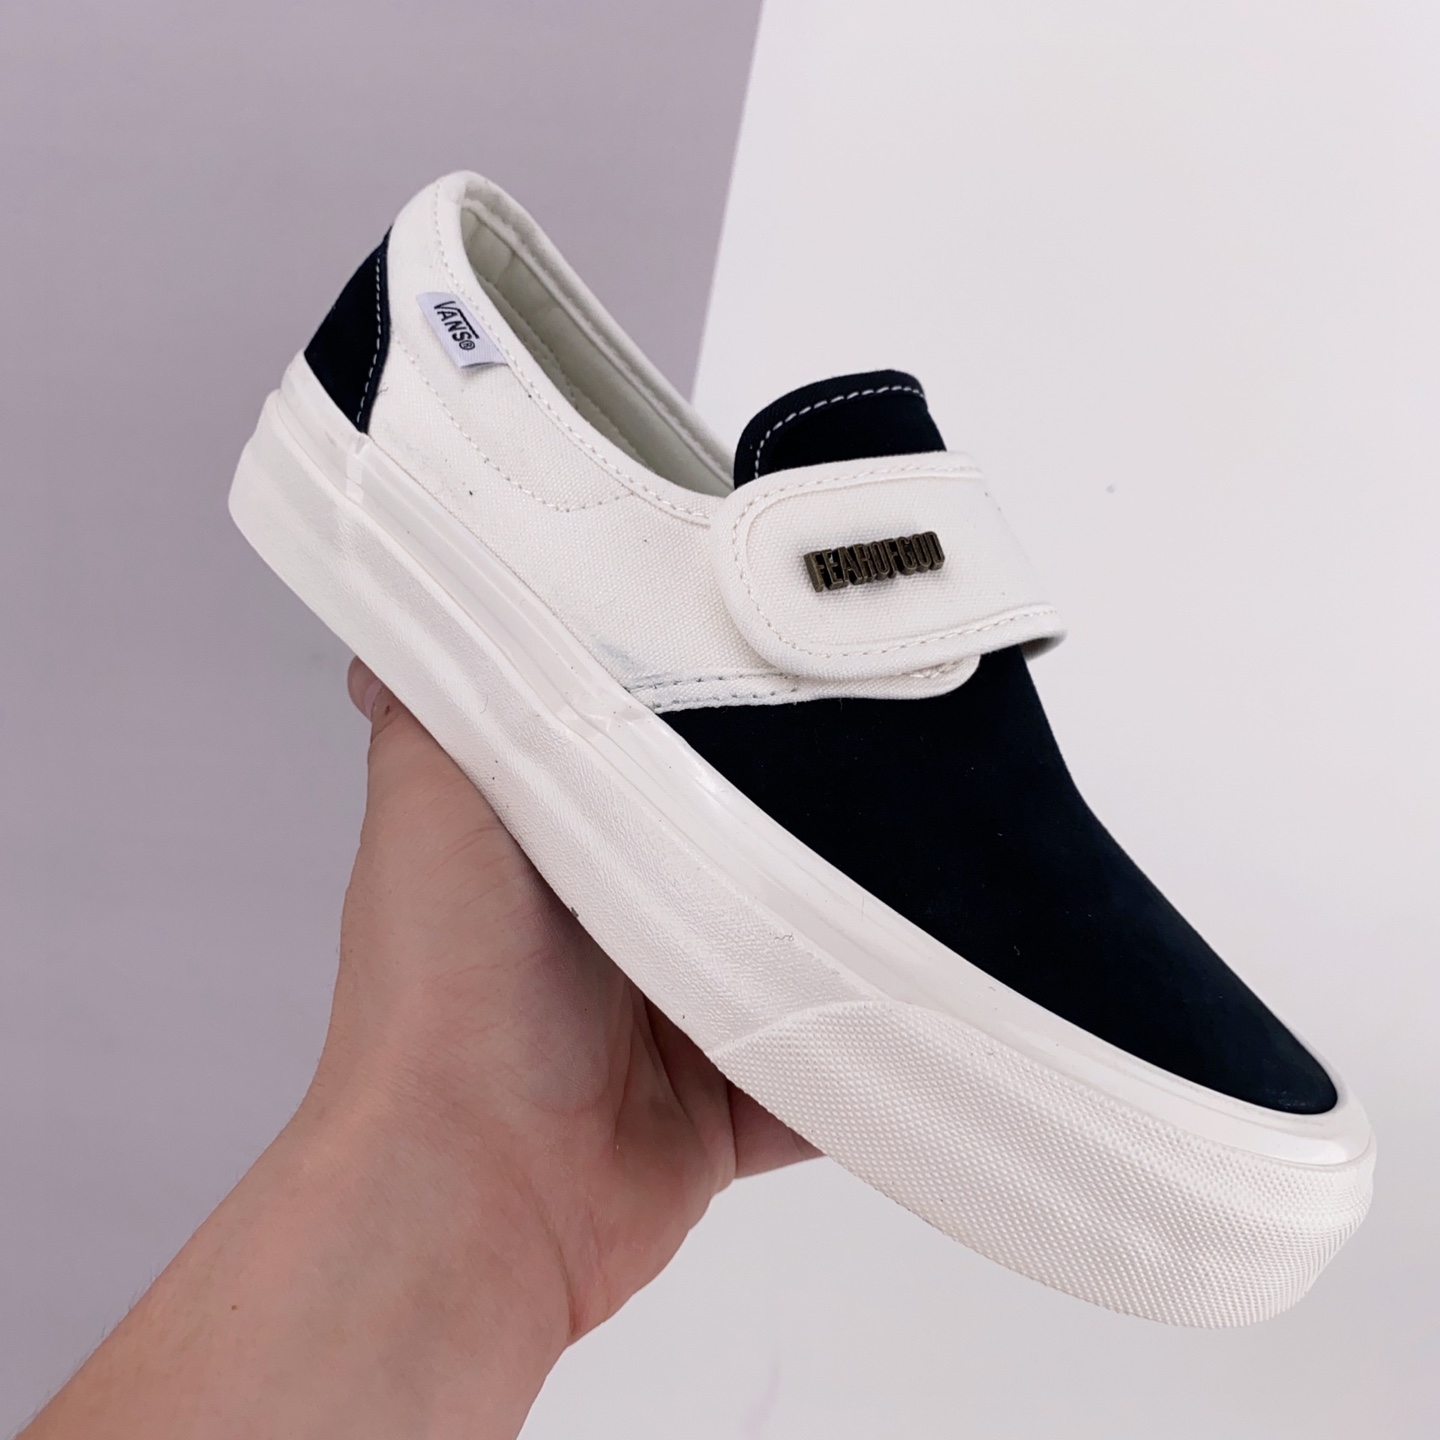 Vans Fear of God x Slip-On 47 DX - Collection 2 Black White | Limited Edition